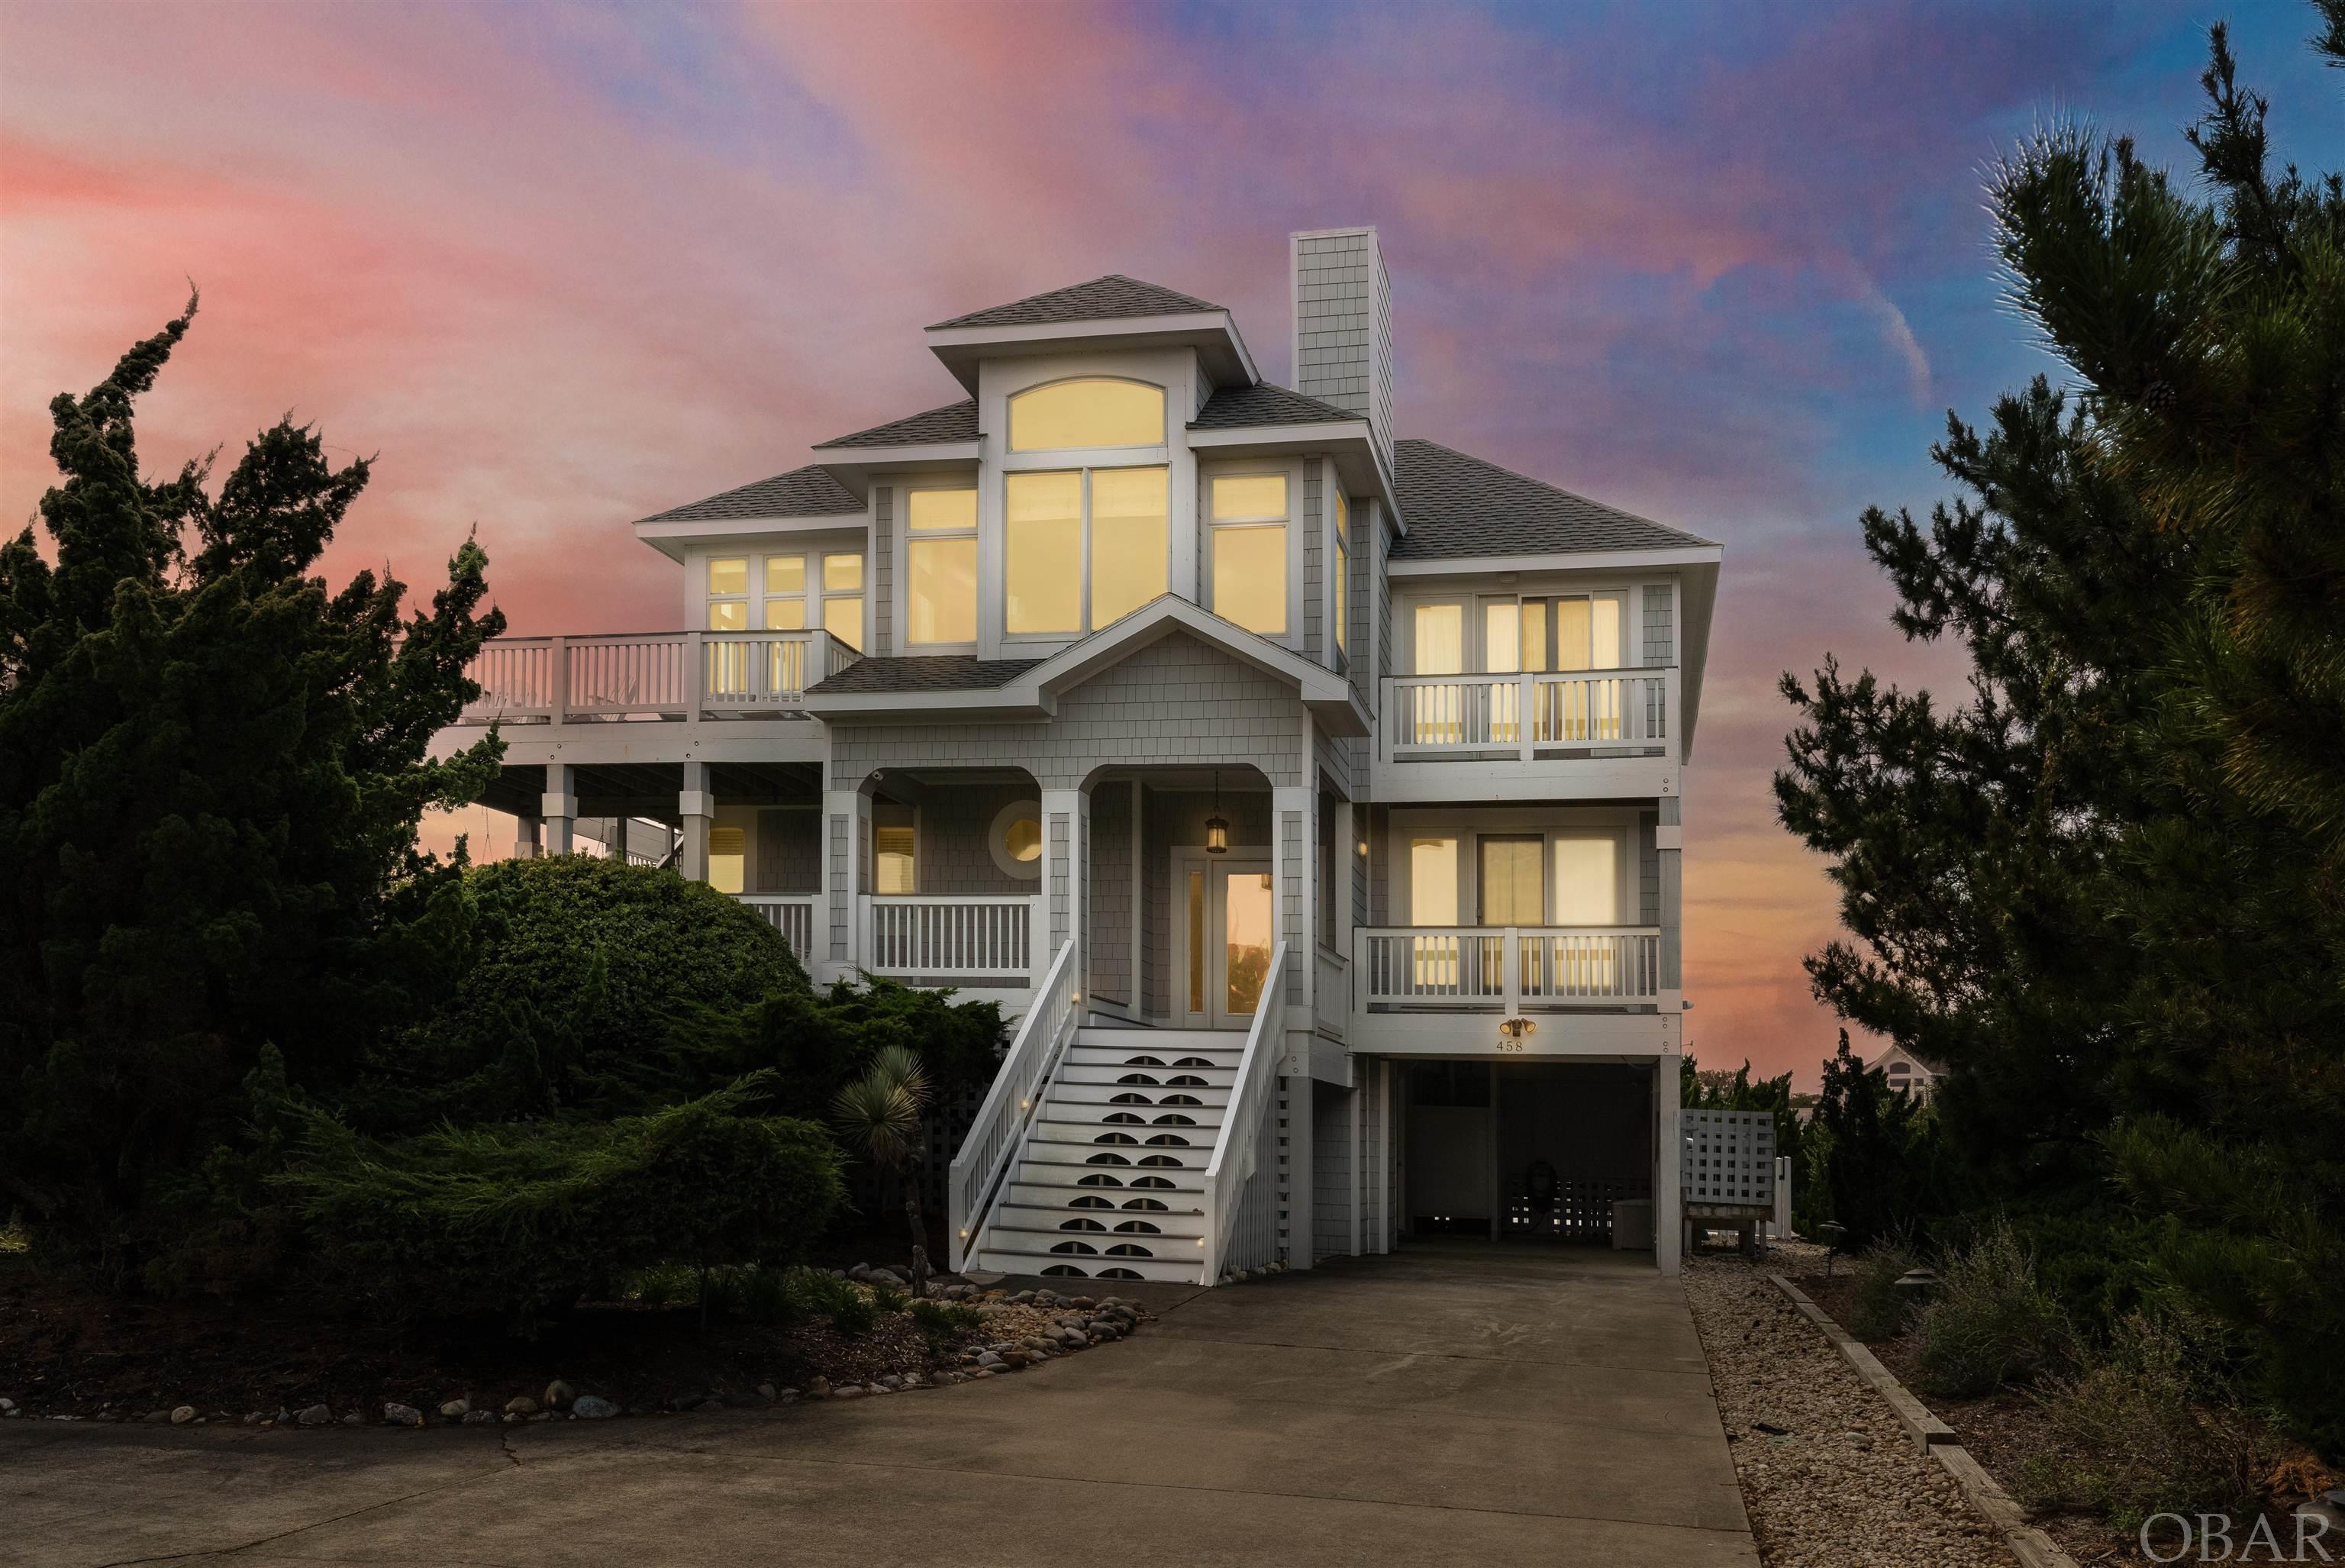 Custom built and impeccably well-maintained semi-oceanfront home situated on a quiet cul-de-sac in the sought after Pine Island community of Corolla. Boasting a well thought out floor plan, ocean views, ample home and community amenities, and a professionally appointed interior, this is one you don't want to miss! With major improvements made since purchase in 2000, and used as a second home since, this home shows like new. On the top floor a spacious open concept living room w/ gas fireplace, comprehensive audio & visual system with surround sound, ocean views, direct deck access, and a half bath serves as the perfect space to relax and unwind with friends & family. A gourmet kitchen boasting granite countertops, stainless steel appliances, a wine fridge, viking range, dual dishwashers and sinks, and both island & dining seating, is a chef's dream come true! Sneak away to the upstairs ships watch to play a game of cards or relax with a good book. Enjoy time soaking up the sunshine on the surrounding trex decks boasting ocean views and both dining and lounge seating. The top floor primary en suite offers a privacy deck, bathroom w/ custom tiled shower, plantation shutters, and a dual vanity, as well as a walk-in closet. A grand foyer entry welcomes you in on the second floor, leading to a sitting area to relax and unwind after time spent on the beach. This floor includes two en suites, and a spacious bedroom, all with direct deck access, as well as a full bath, and covered decks surrounding. Make your way down to the at home office with a writers desk and sofa, along with a privacy deck overlooking the private pool. The first floor boasts a game room with wet bar, surround sound system, and wraparound seating, a bedroom w/ walk in closet, and full bath. Enjoy the gorgeous private pool (built in 2021), an elevated and covered spa, outdoor shower, electric car charger, exterior storage space, and convenience to the beach access, and Pine Island community amenities within walking distance.